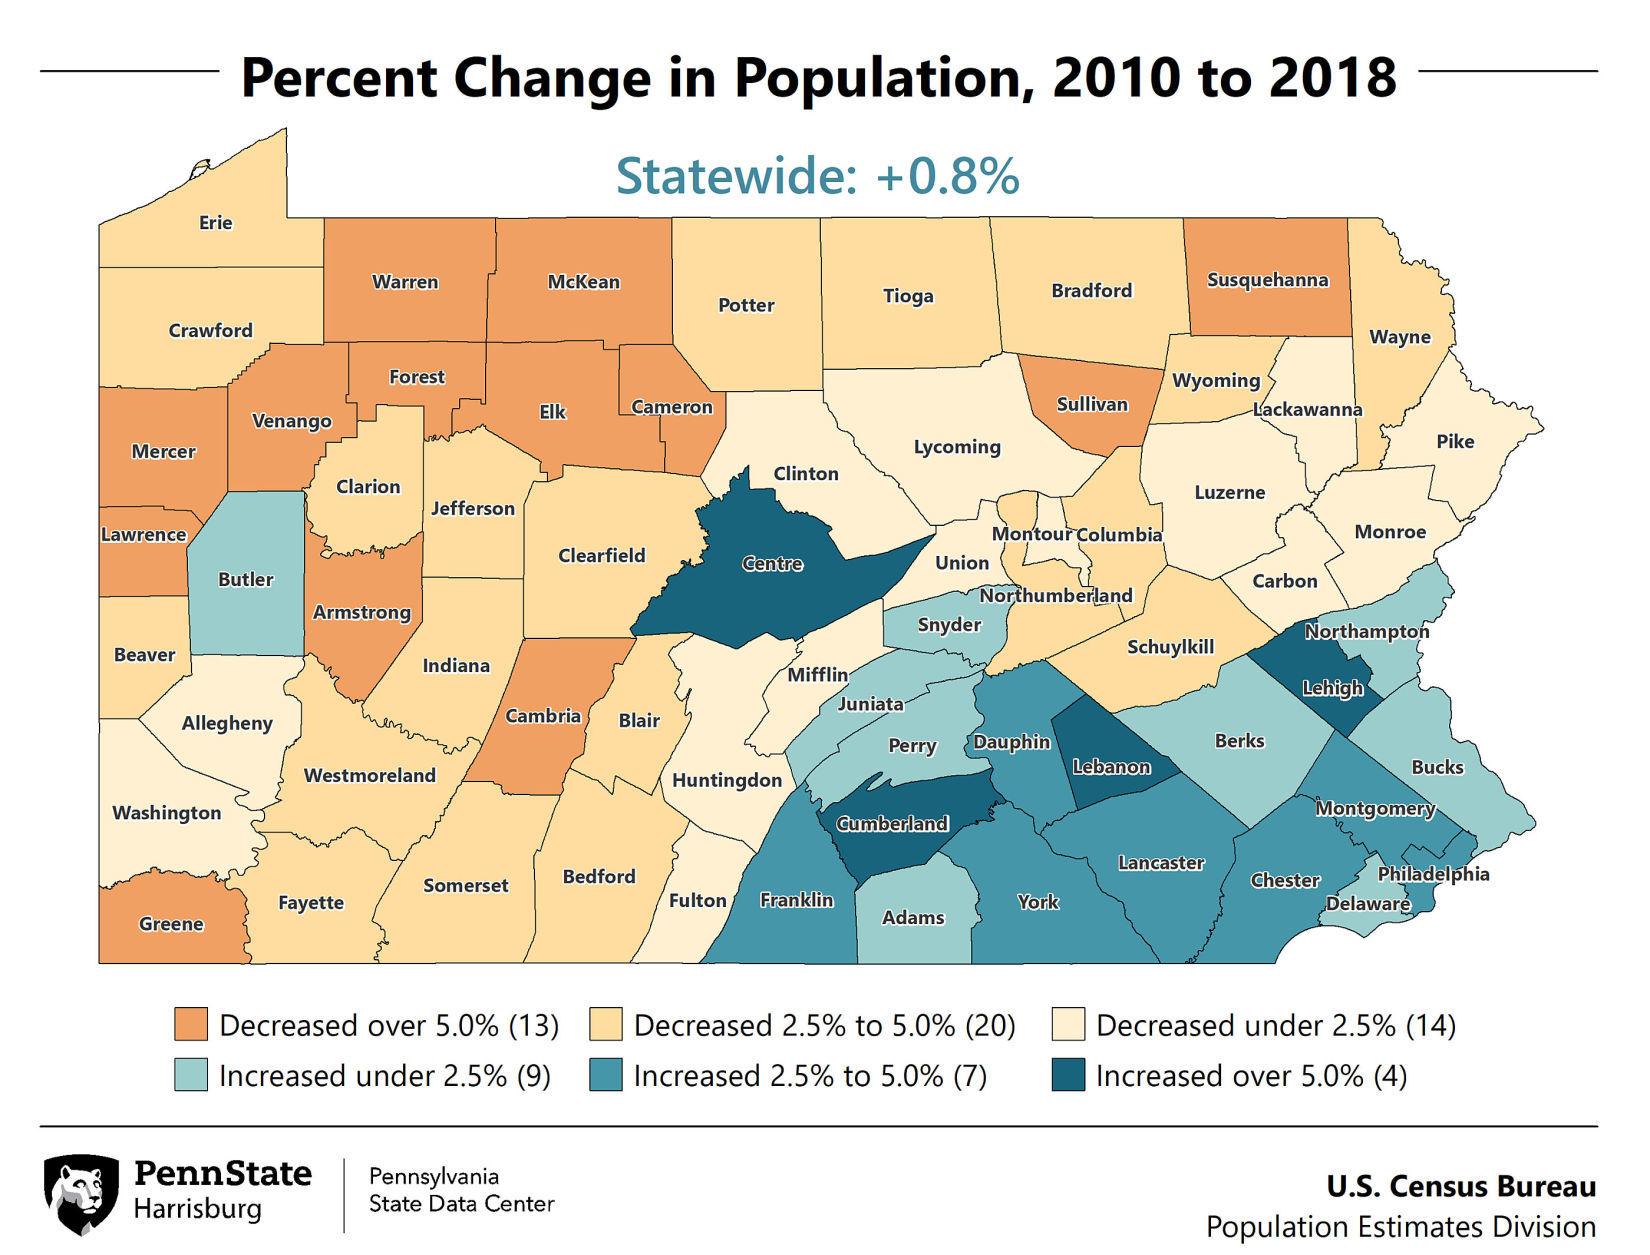 Census Cumberland County still growing population, but drops to second